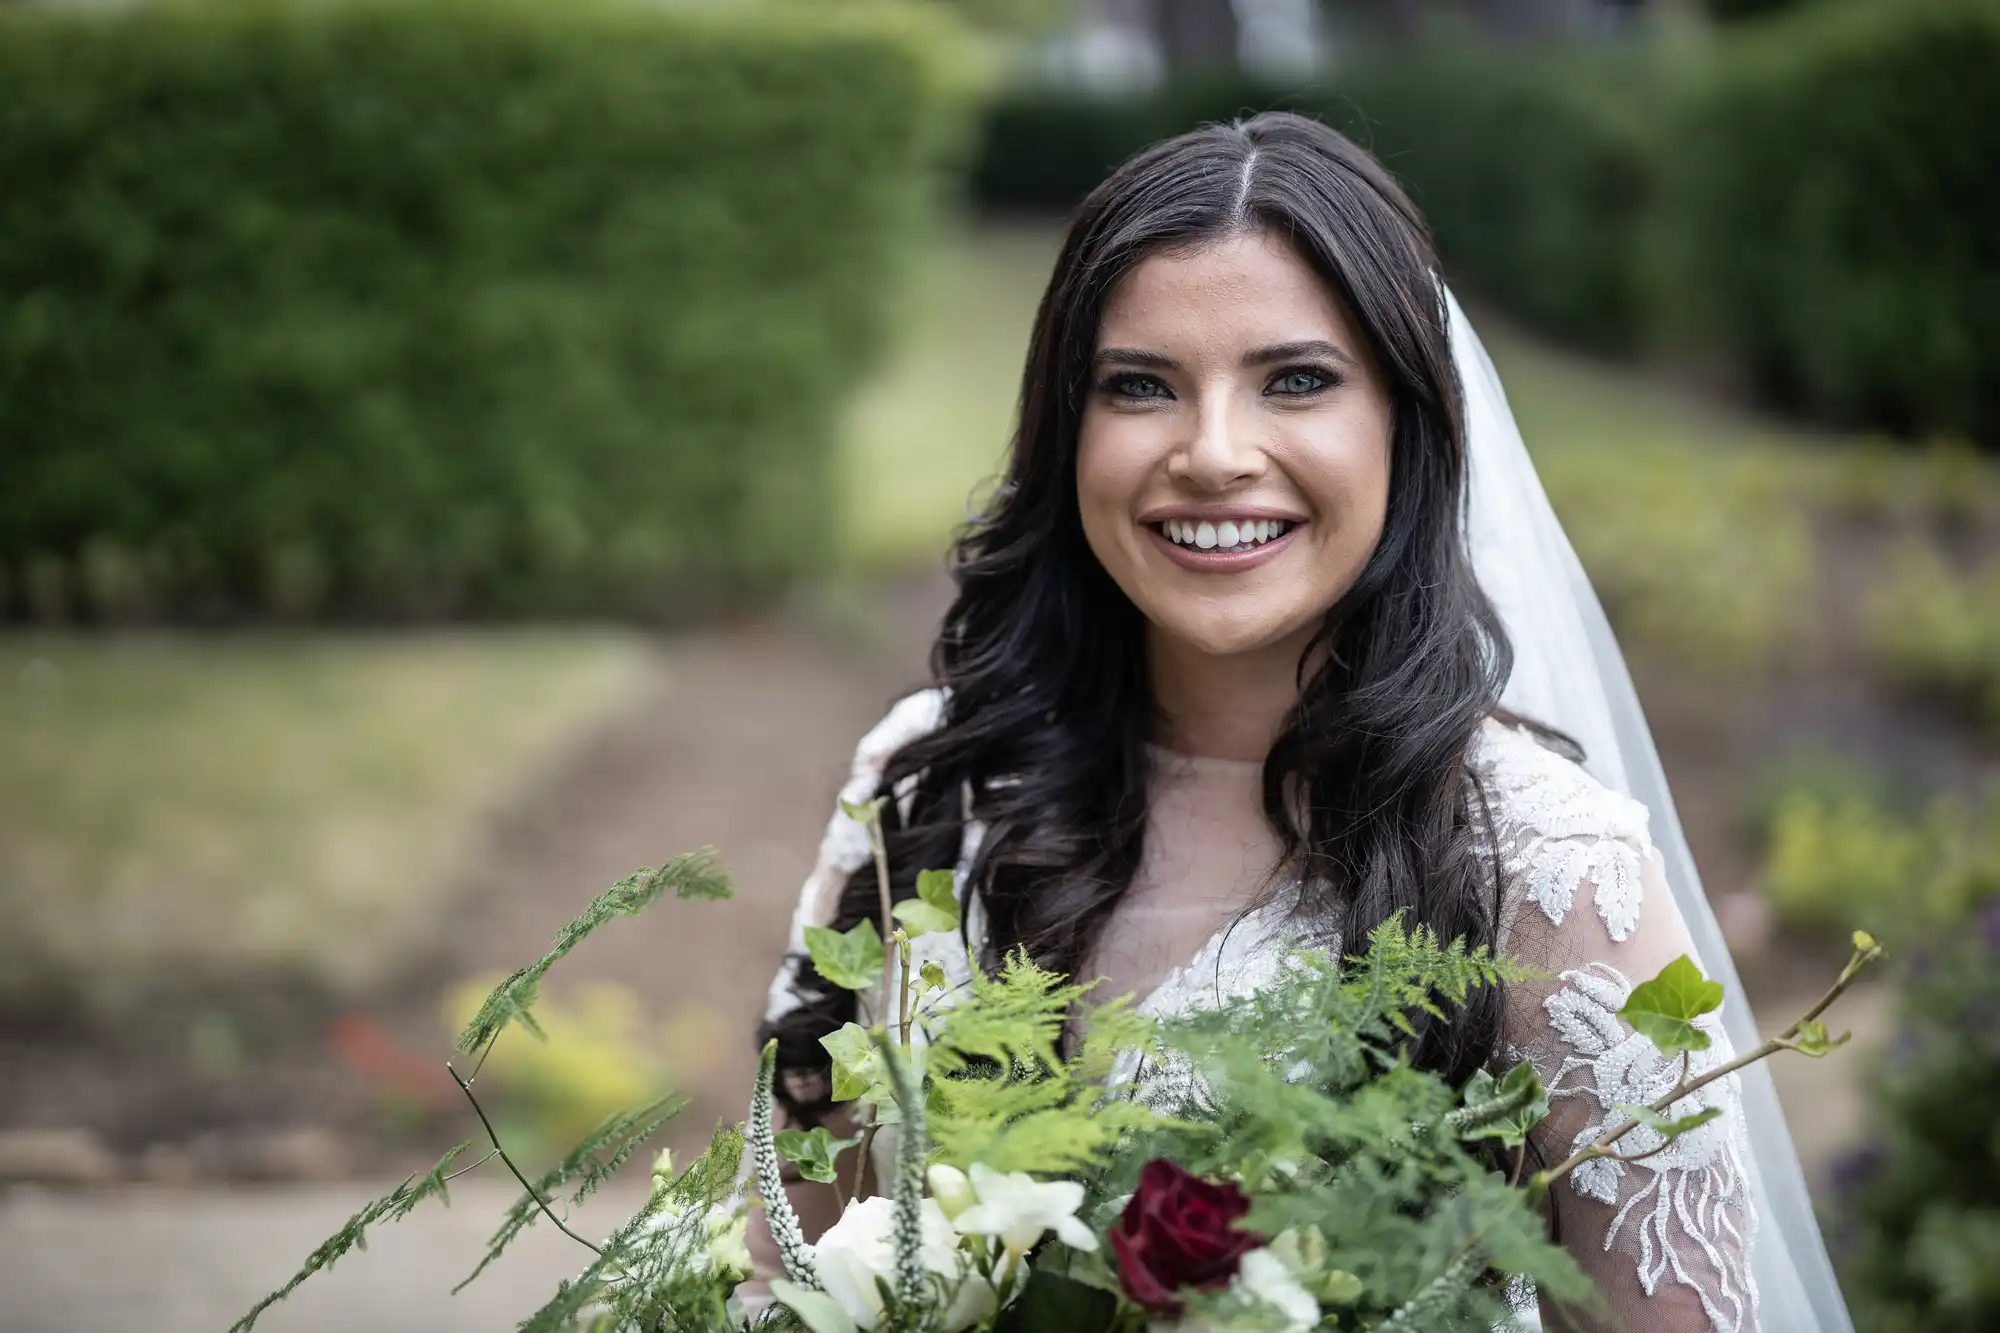 A radiant bride in a lace gown and veil, holding a bouquet, smiles joyously in a garden.